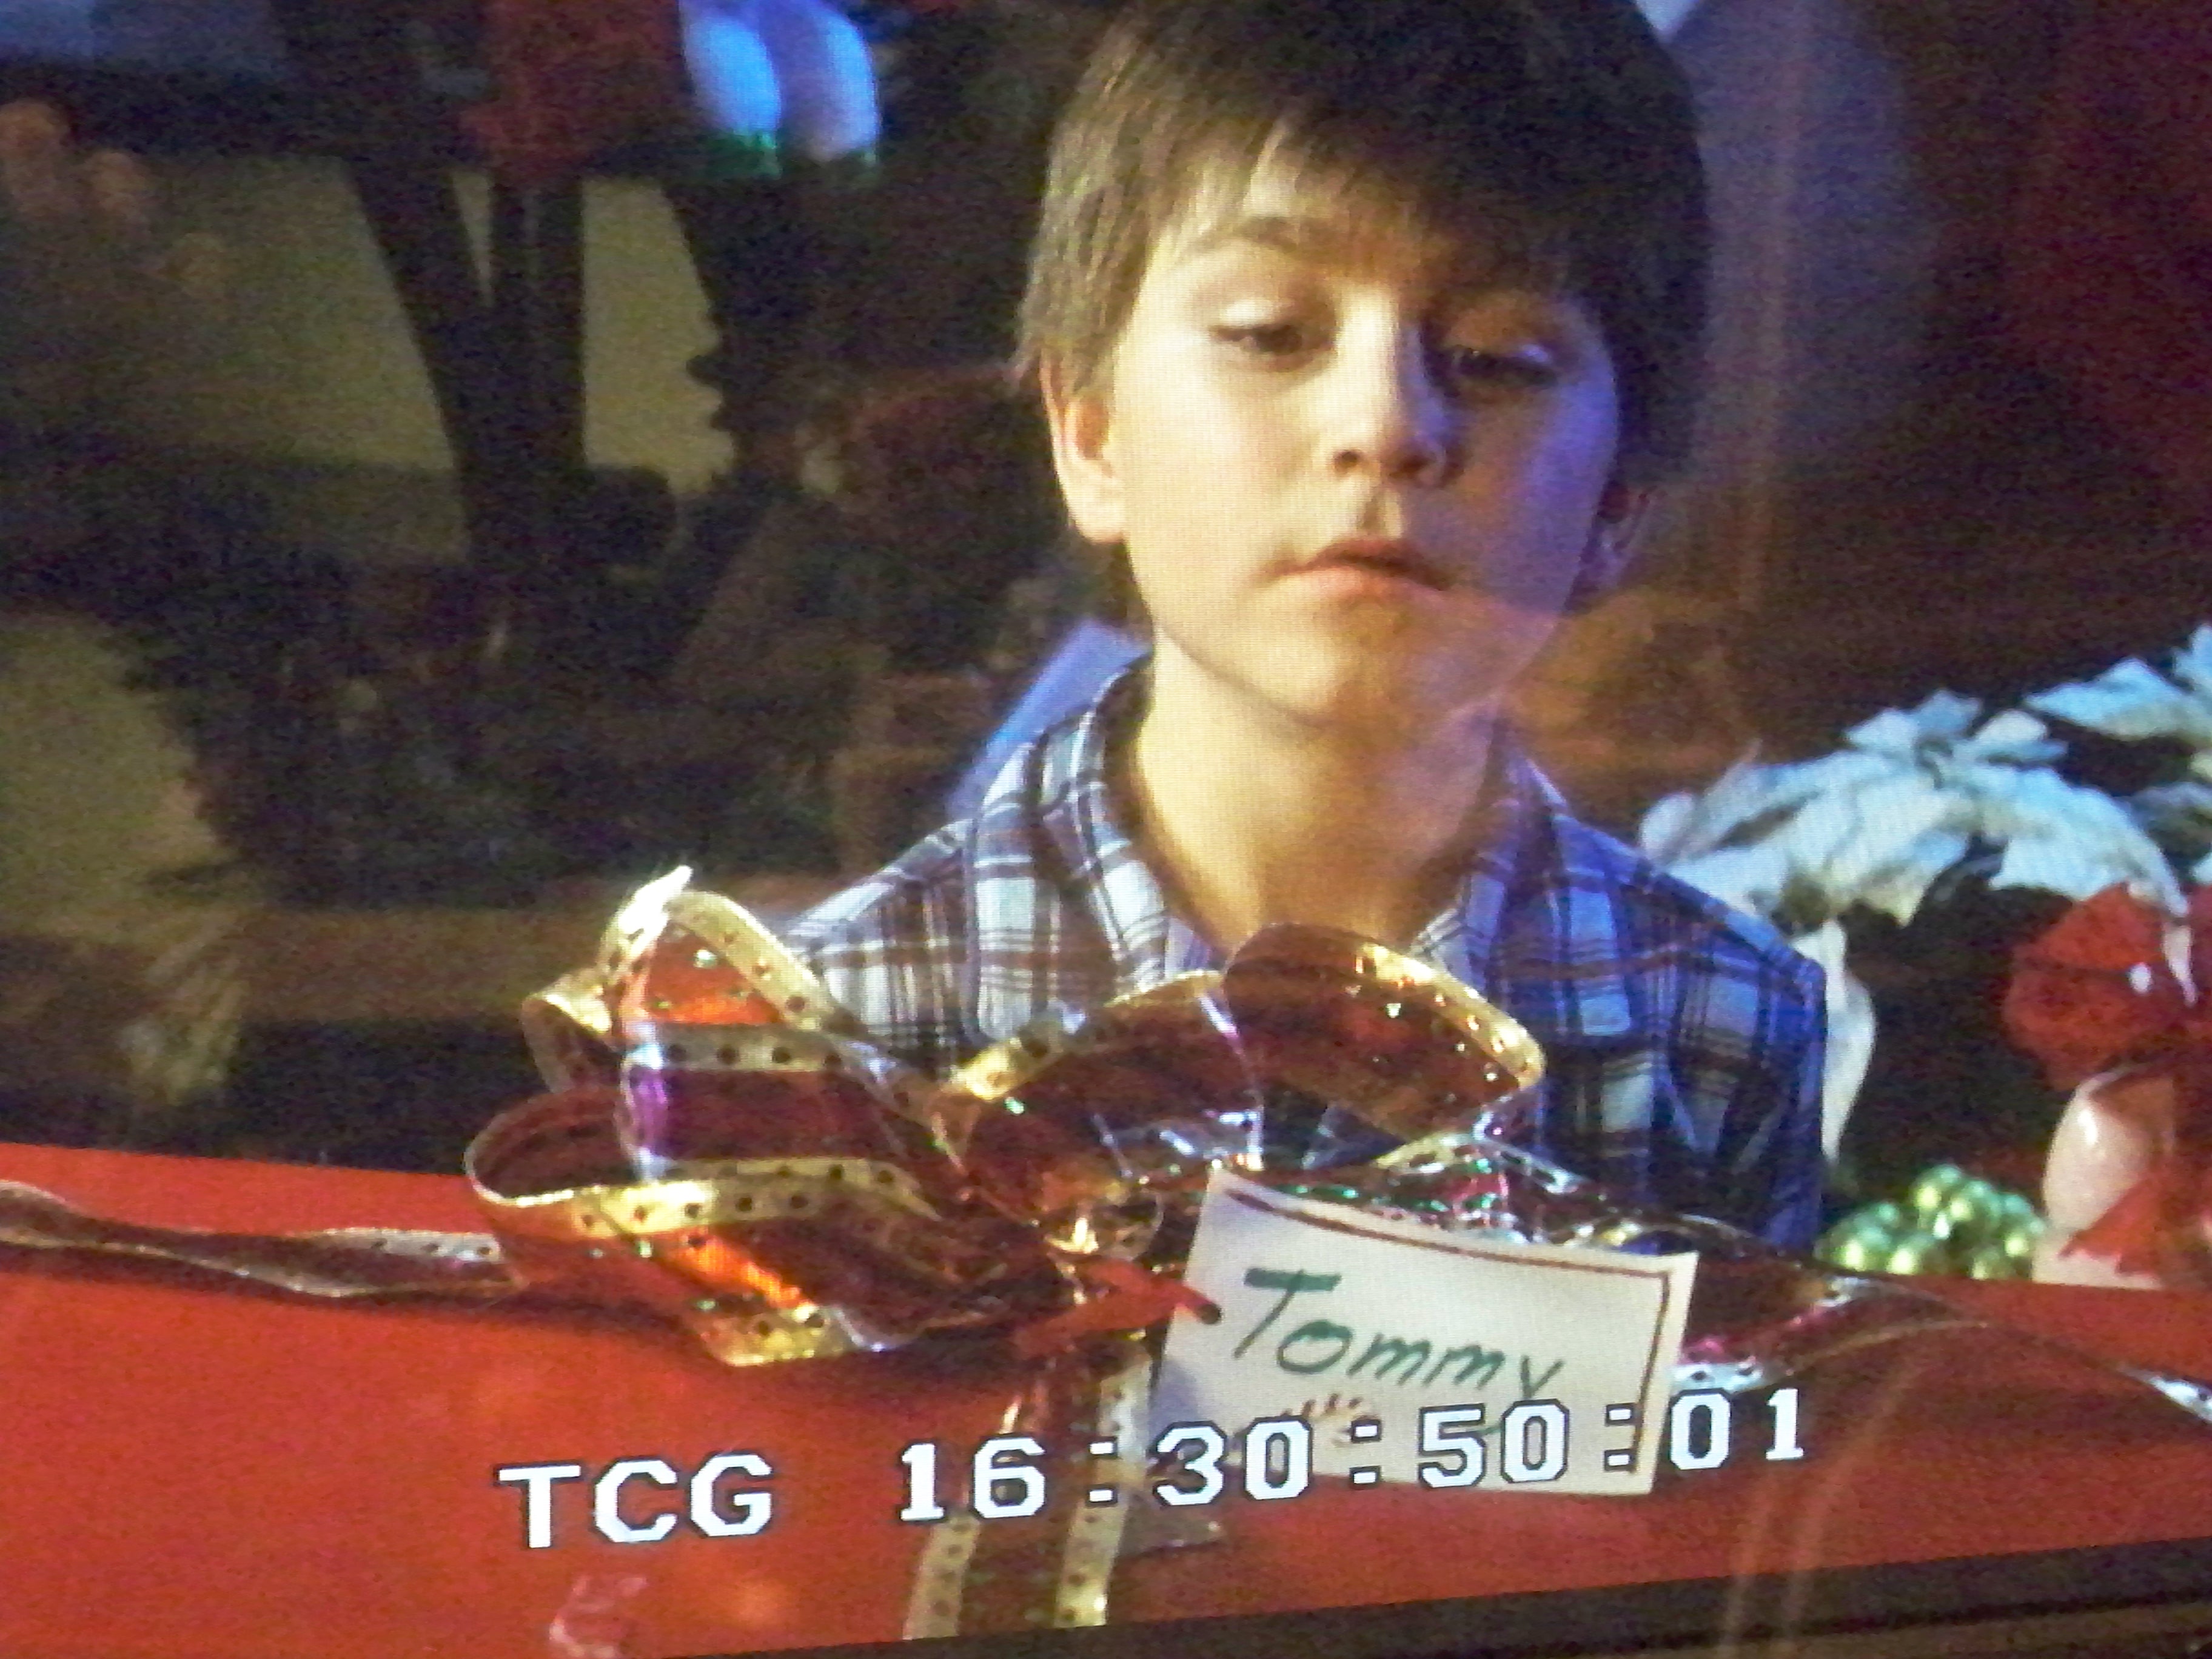 Stone as YOUNG TOMMY WALKER for ABC Brother's and Sister's /KMART